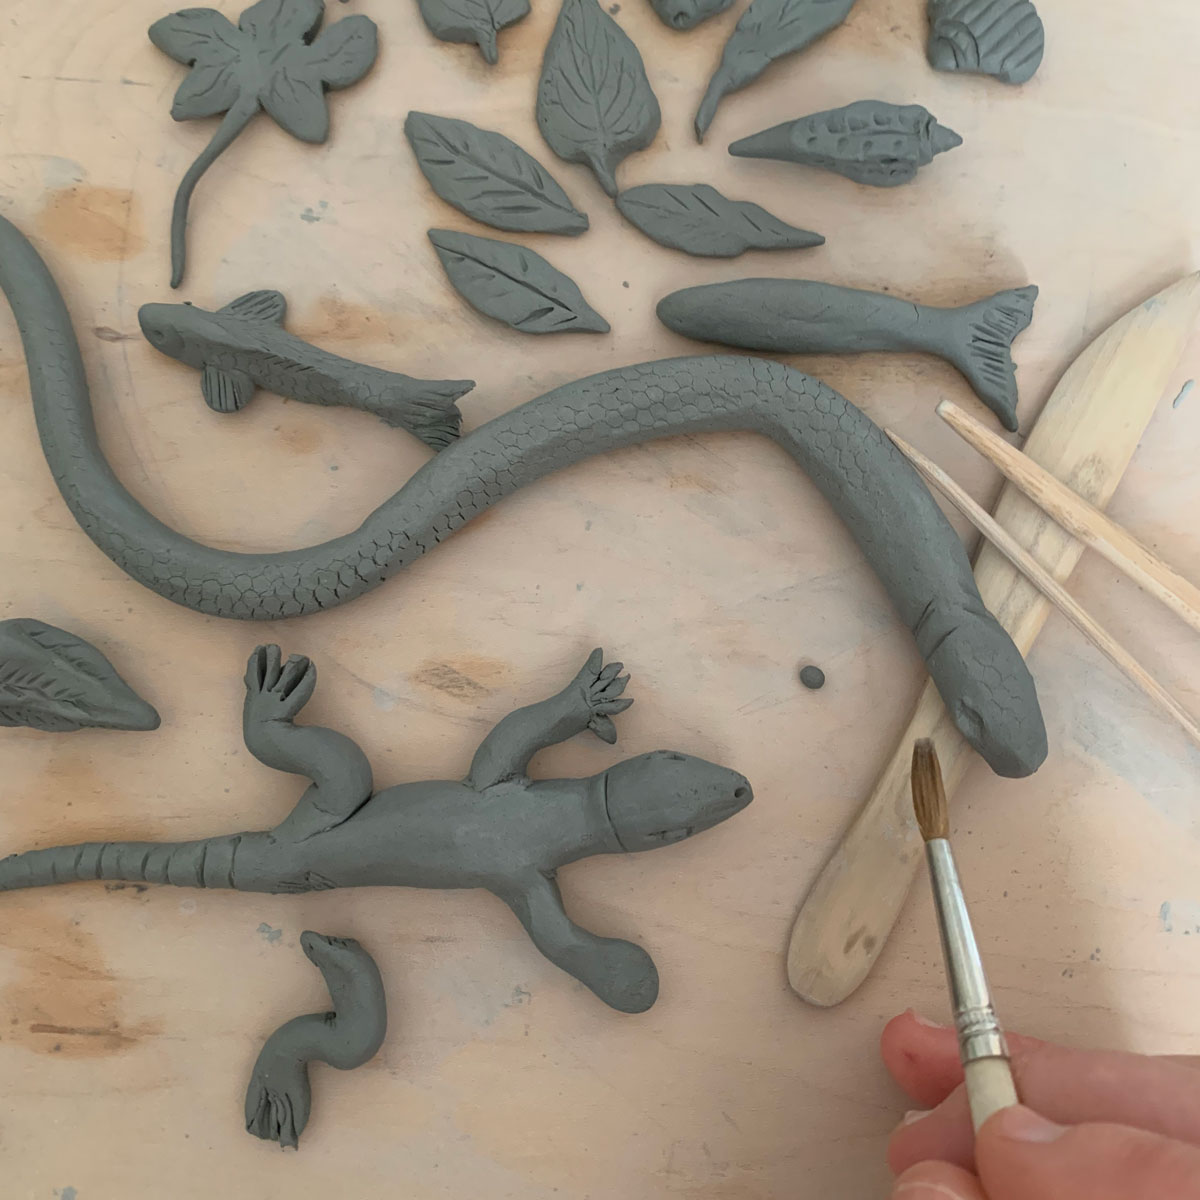 First Impressions of Air Dry Paper Clay - Paisley Lizard